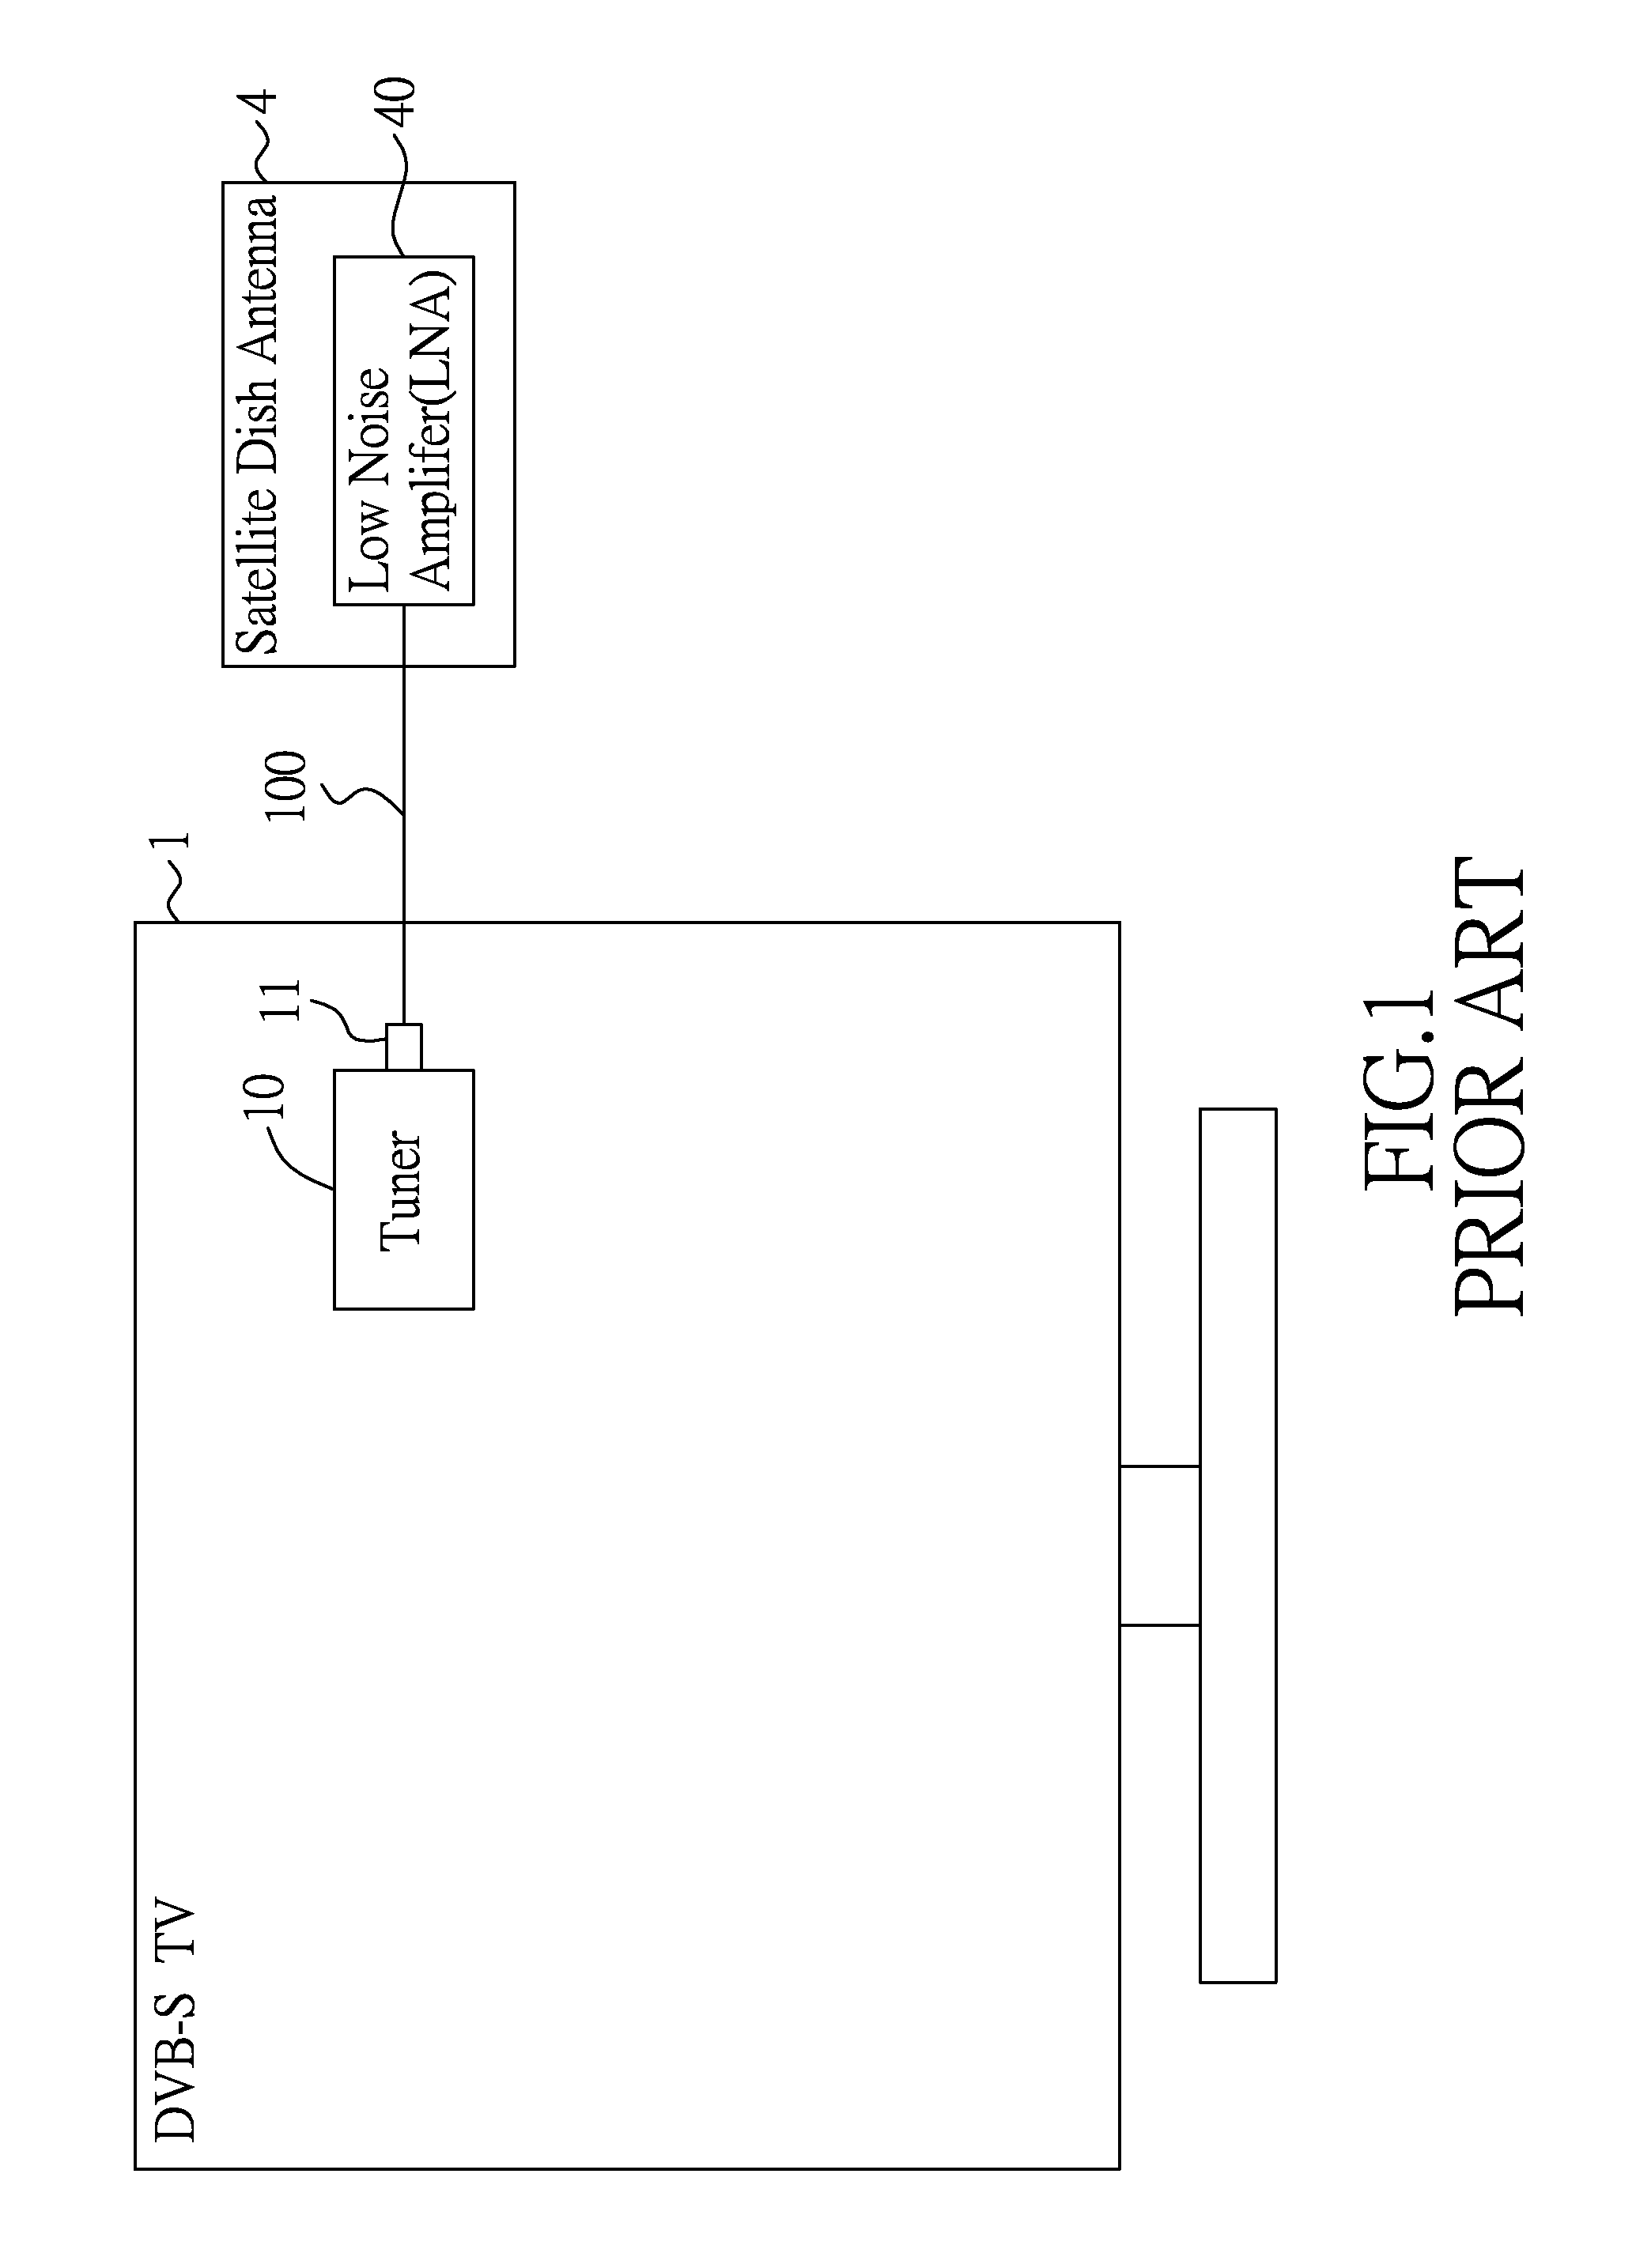 Dvb-s receiver device, adapter for interconnecting a tuner and a scart connector of the dvb-s receiver device, and method for automatically detecting an output voltage of the tuner